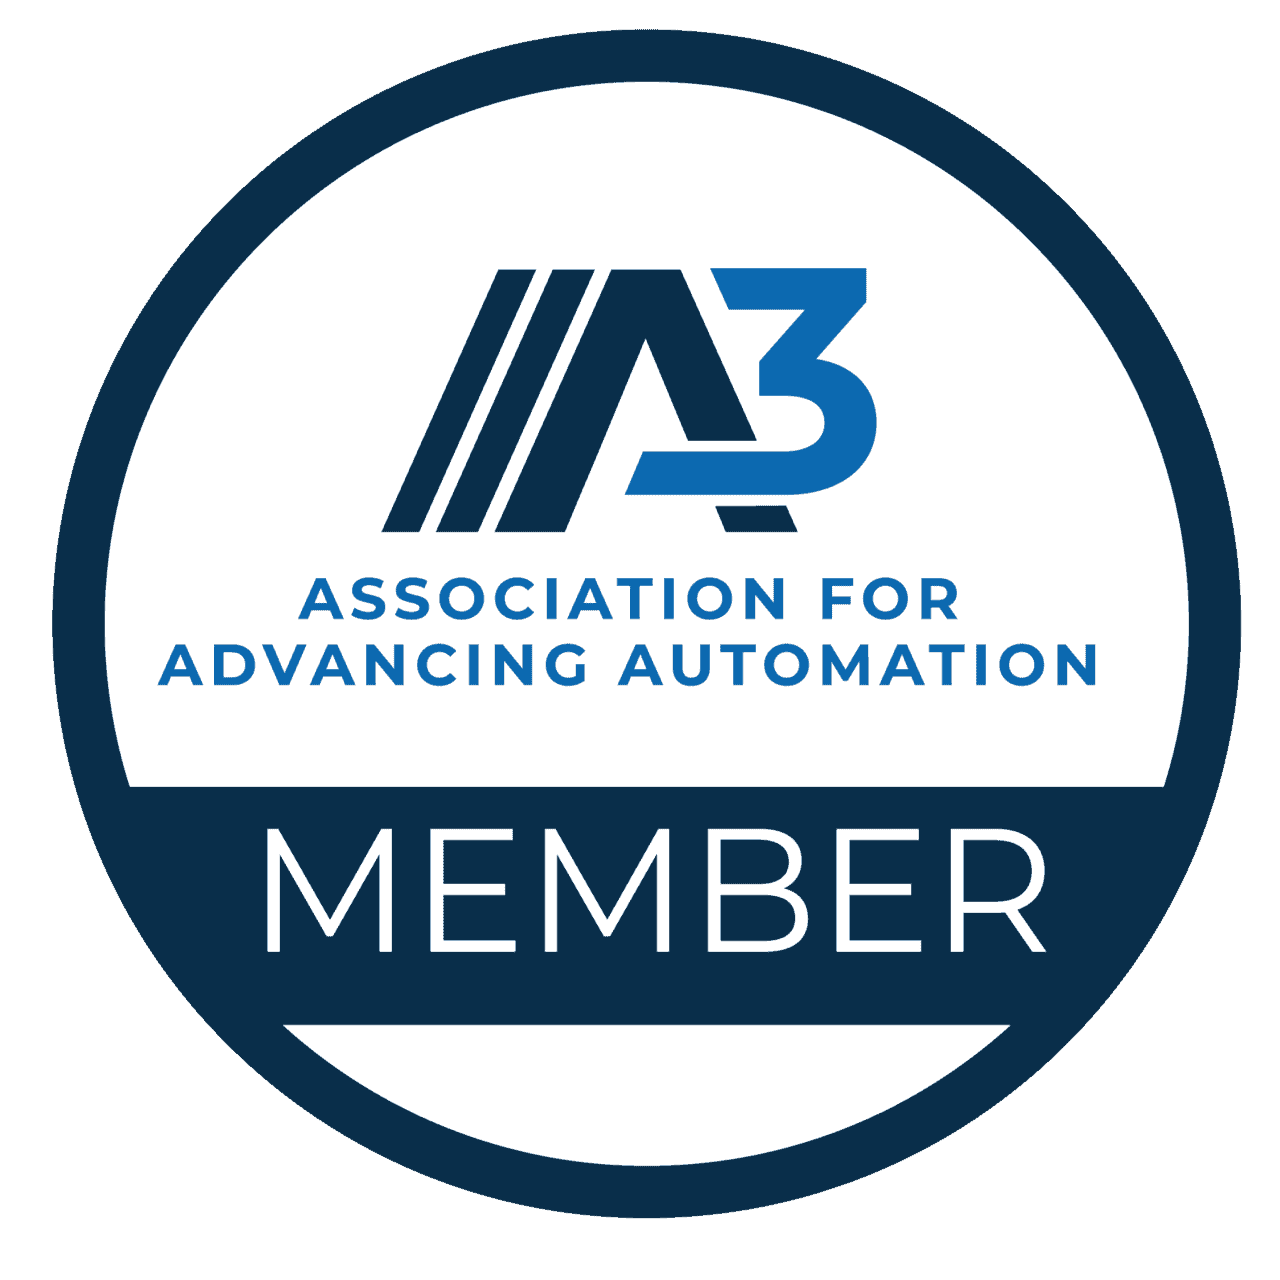 A3 (Association for Advancing Automation) Membership seal